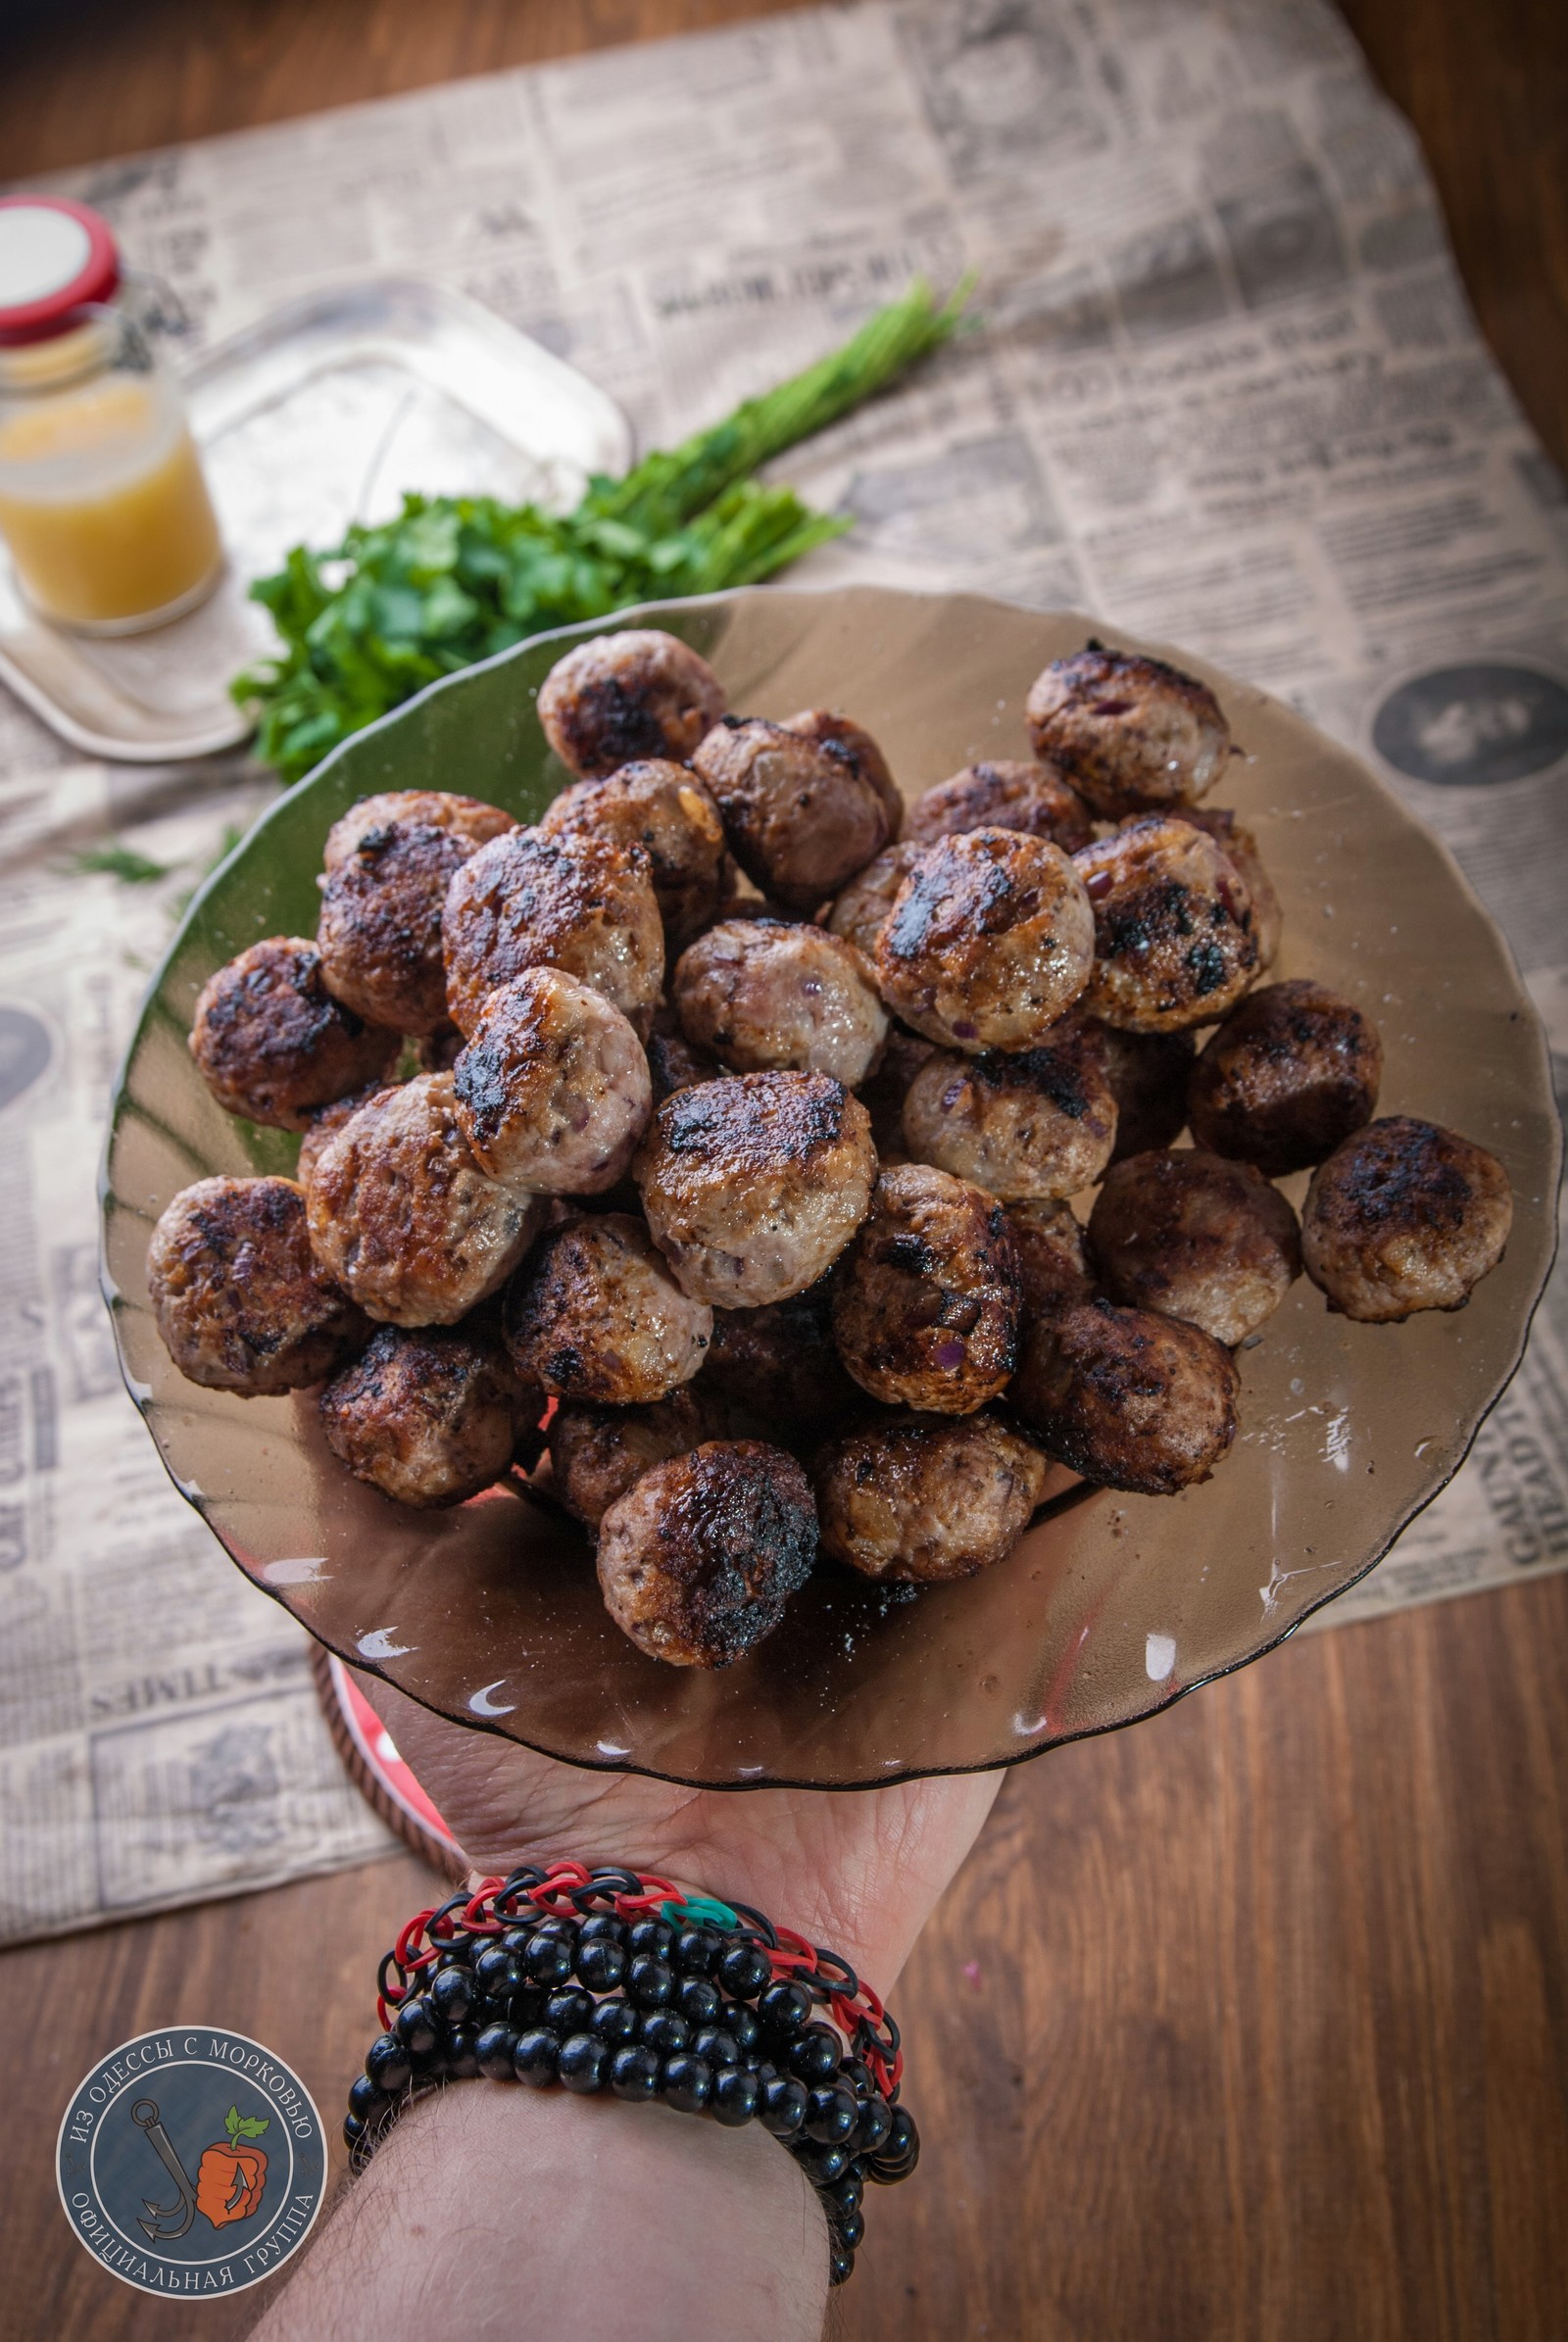 Meatballs for Carlson. - My, Literary Cuisine, Recipe, Food, Longpost, Cooking, The photo, Carlson, From Odessa with carrots